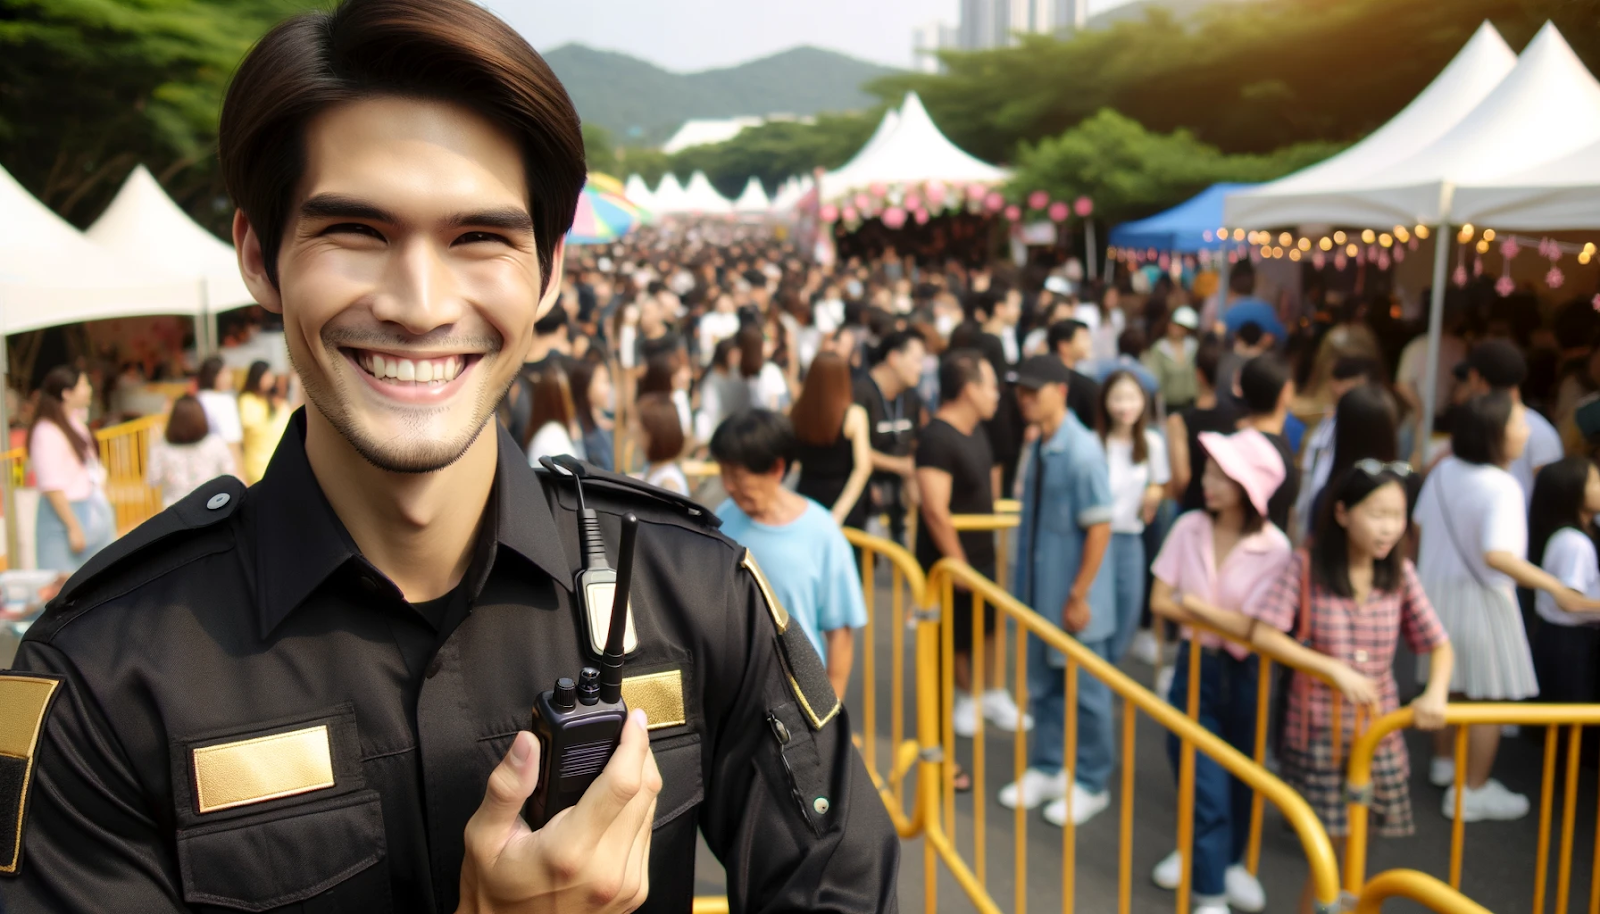 A cheerful security guard in black and gold oversees an organized outdoor event with tents and barriers, holding a walkie-talkie and managing crowd control.